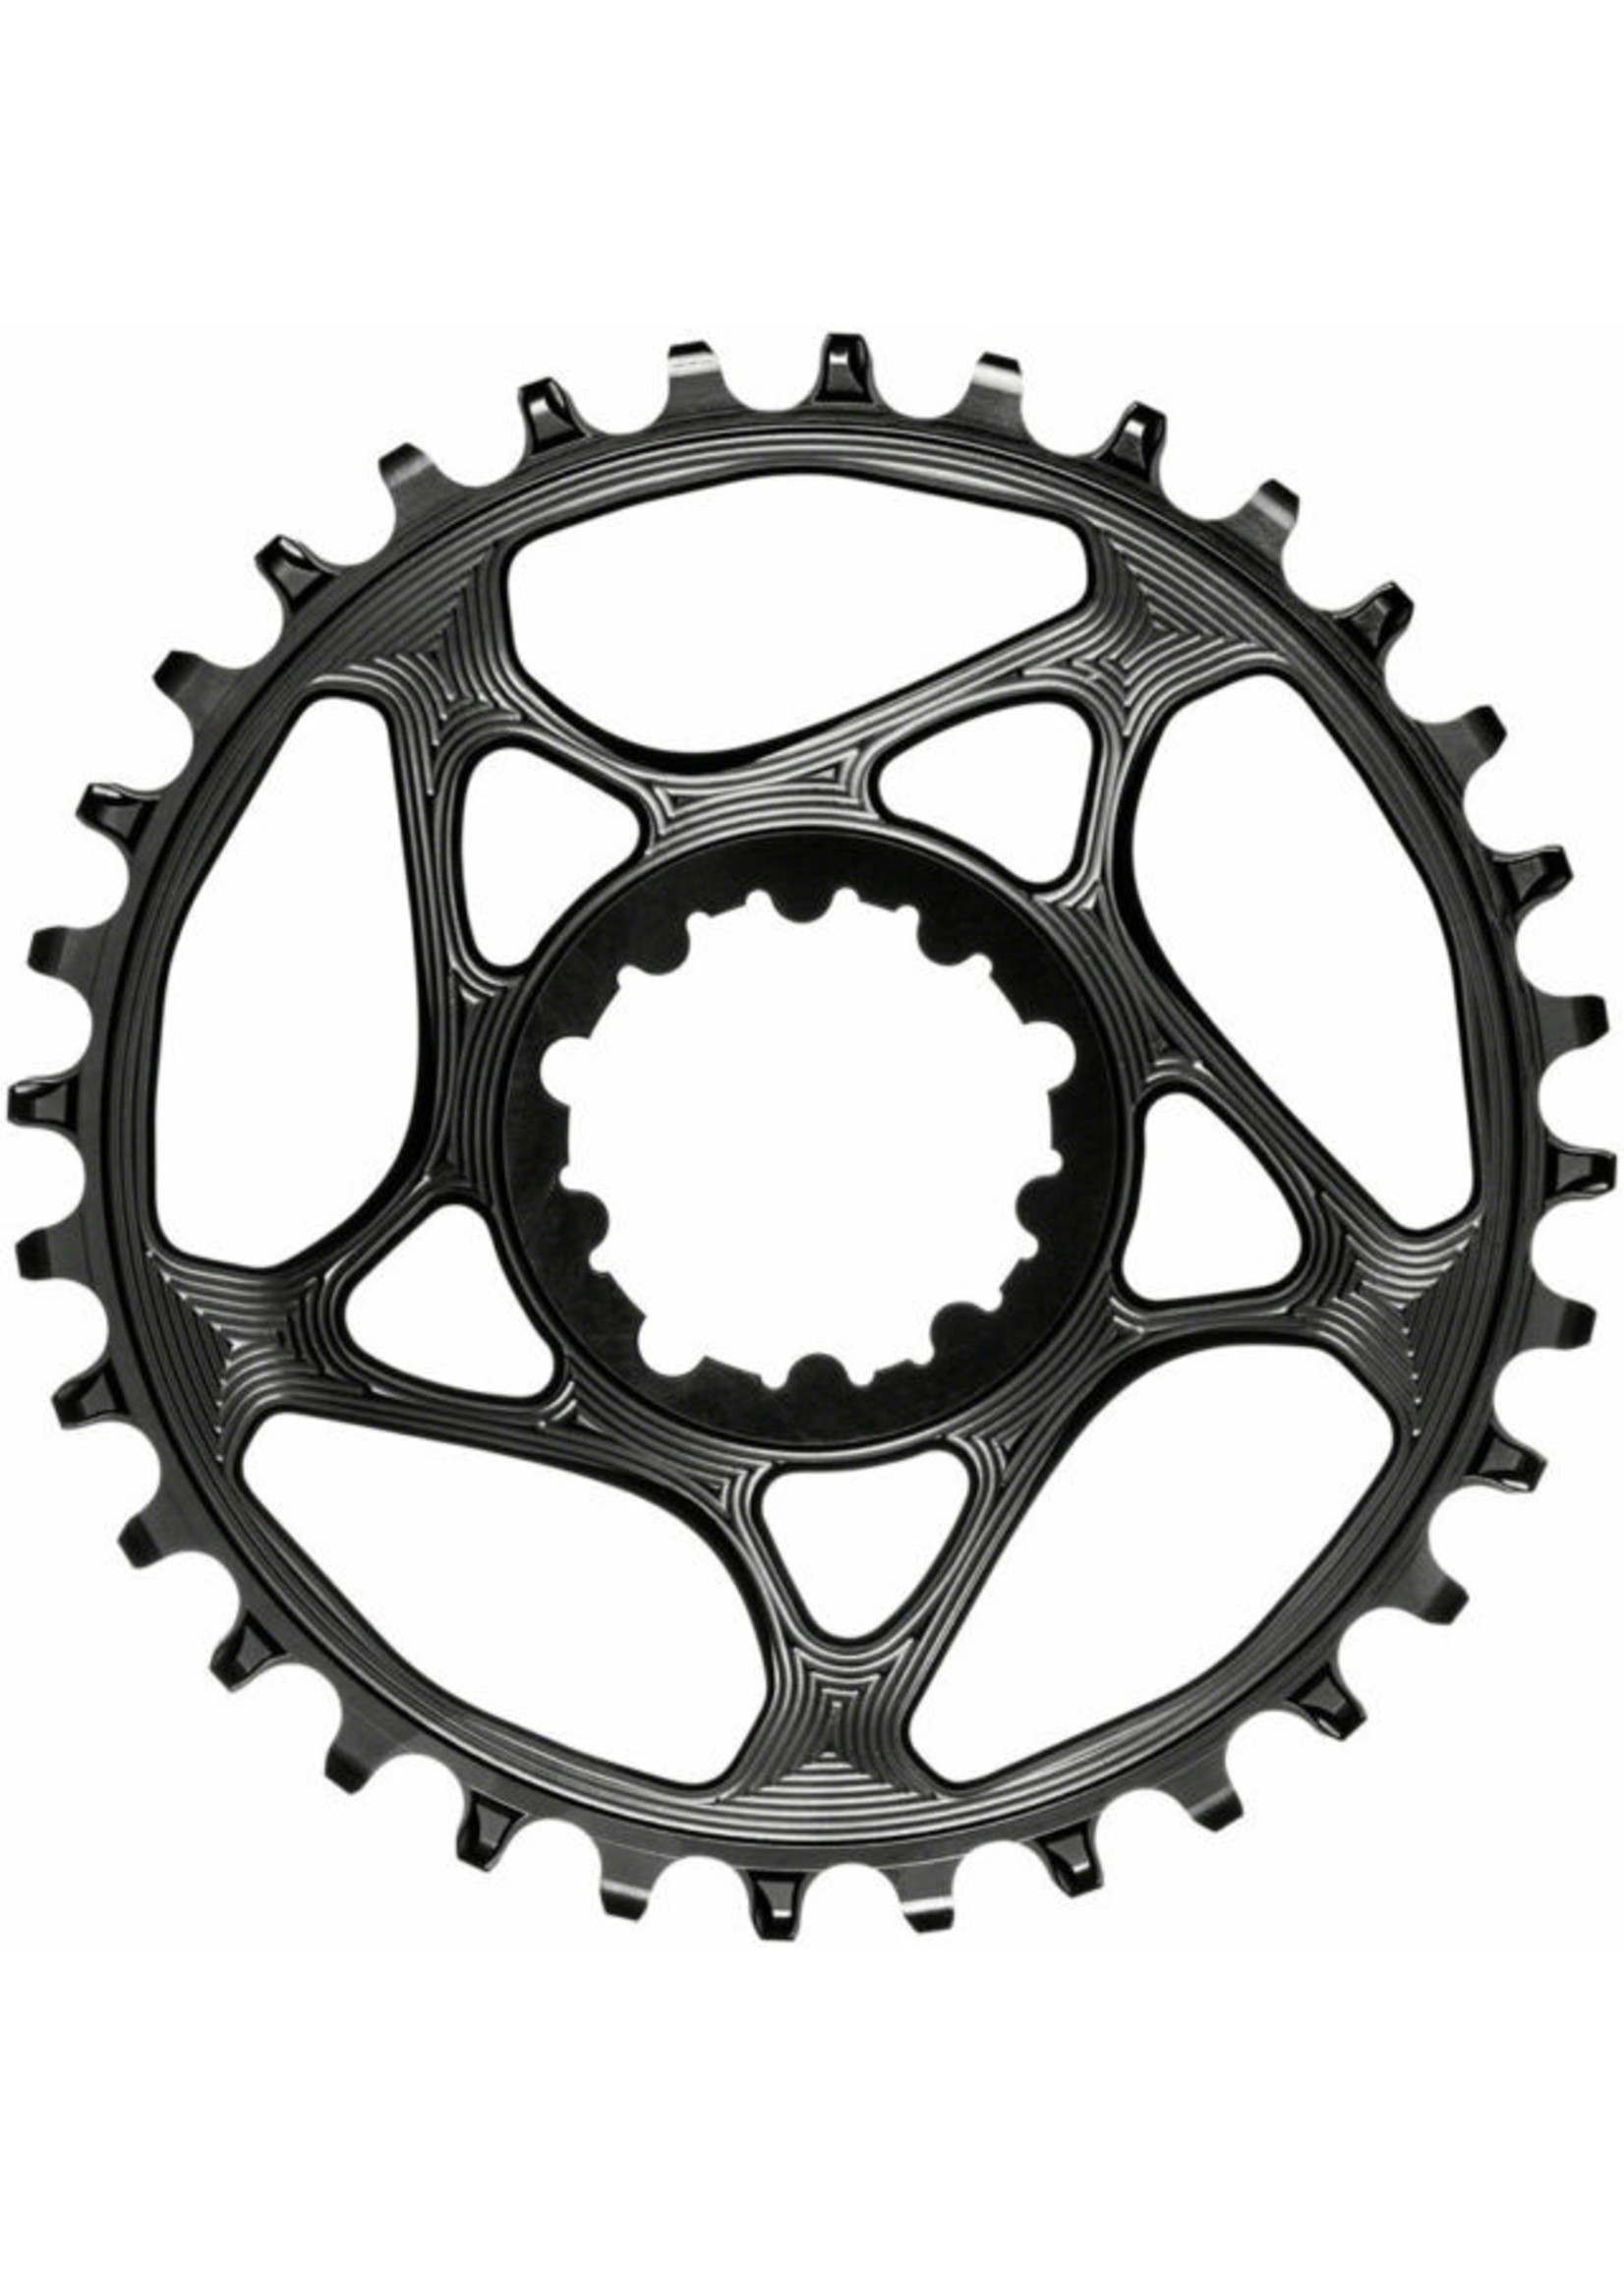 Absolute Black AbsoluteBlack Round N/W Chainring Direct Mount GXP 30T Black